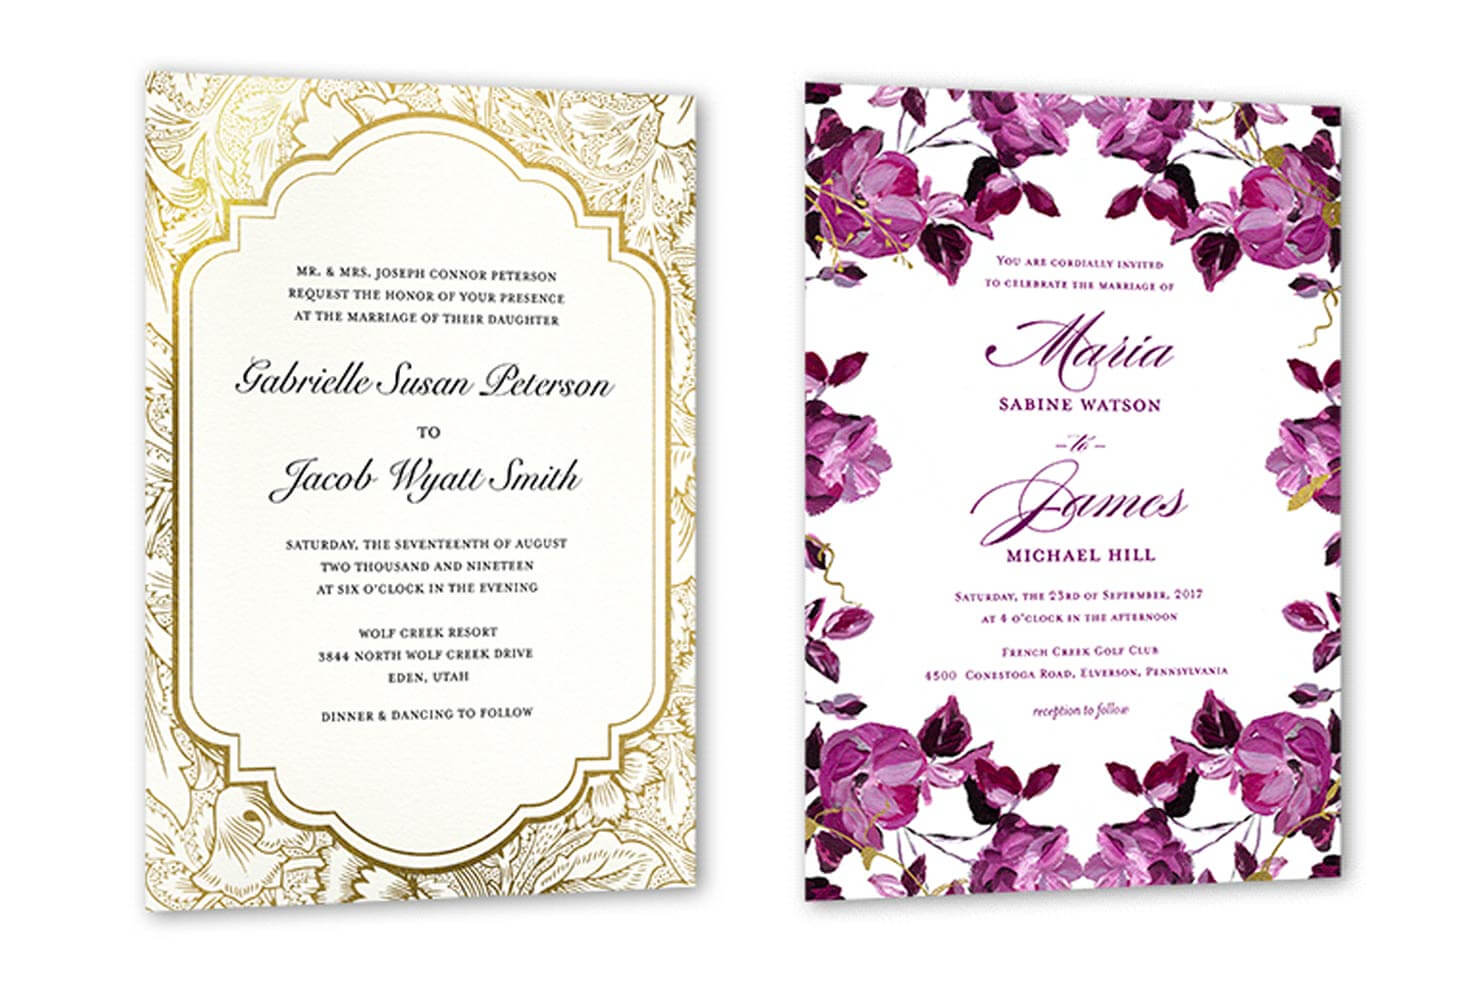 35+ Wedding Invitation Wording Examples 2020 | Shutterfly With Regard To Sample Wedding Invitation Cards Templates